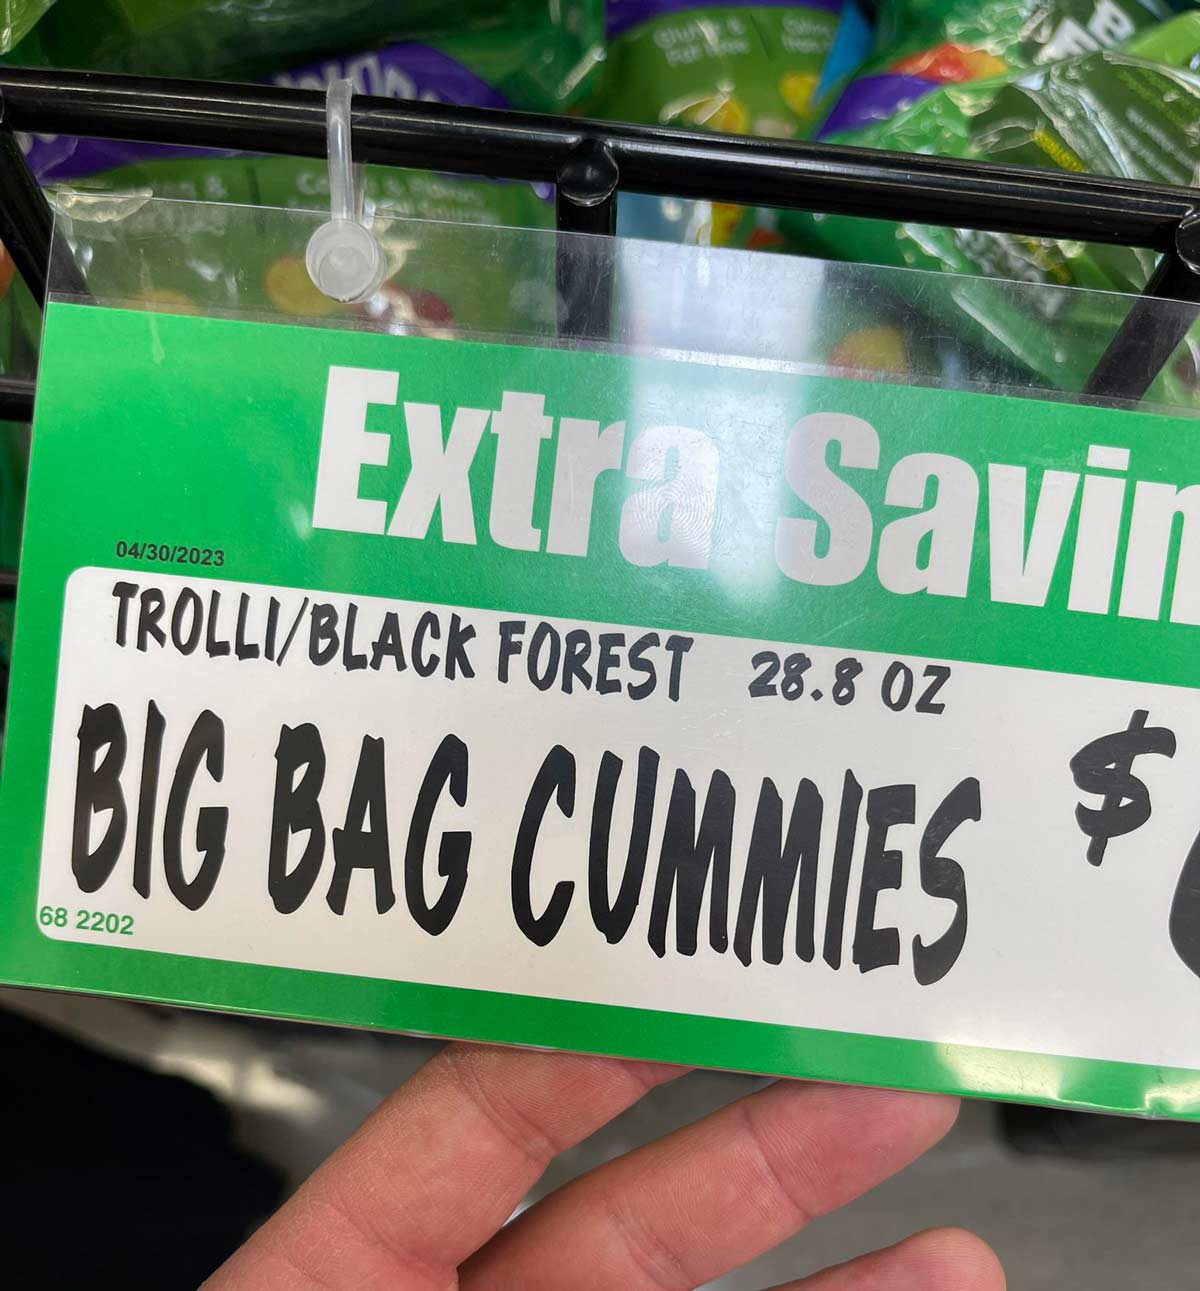 I think they labeled these gummies wrong